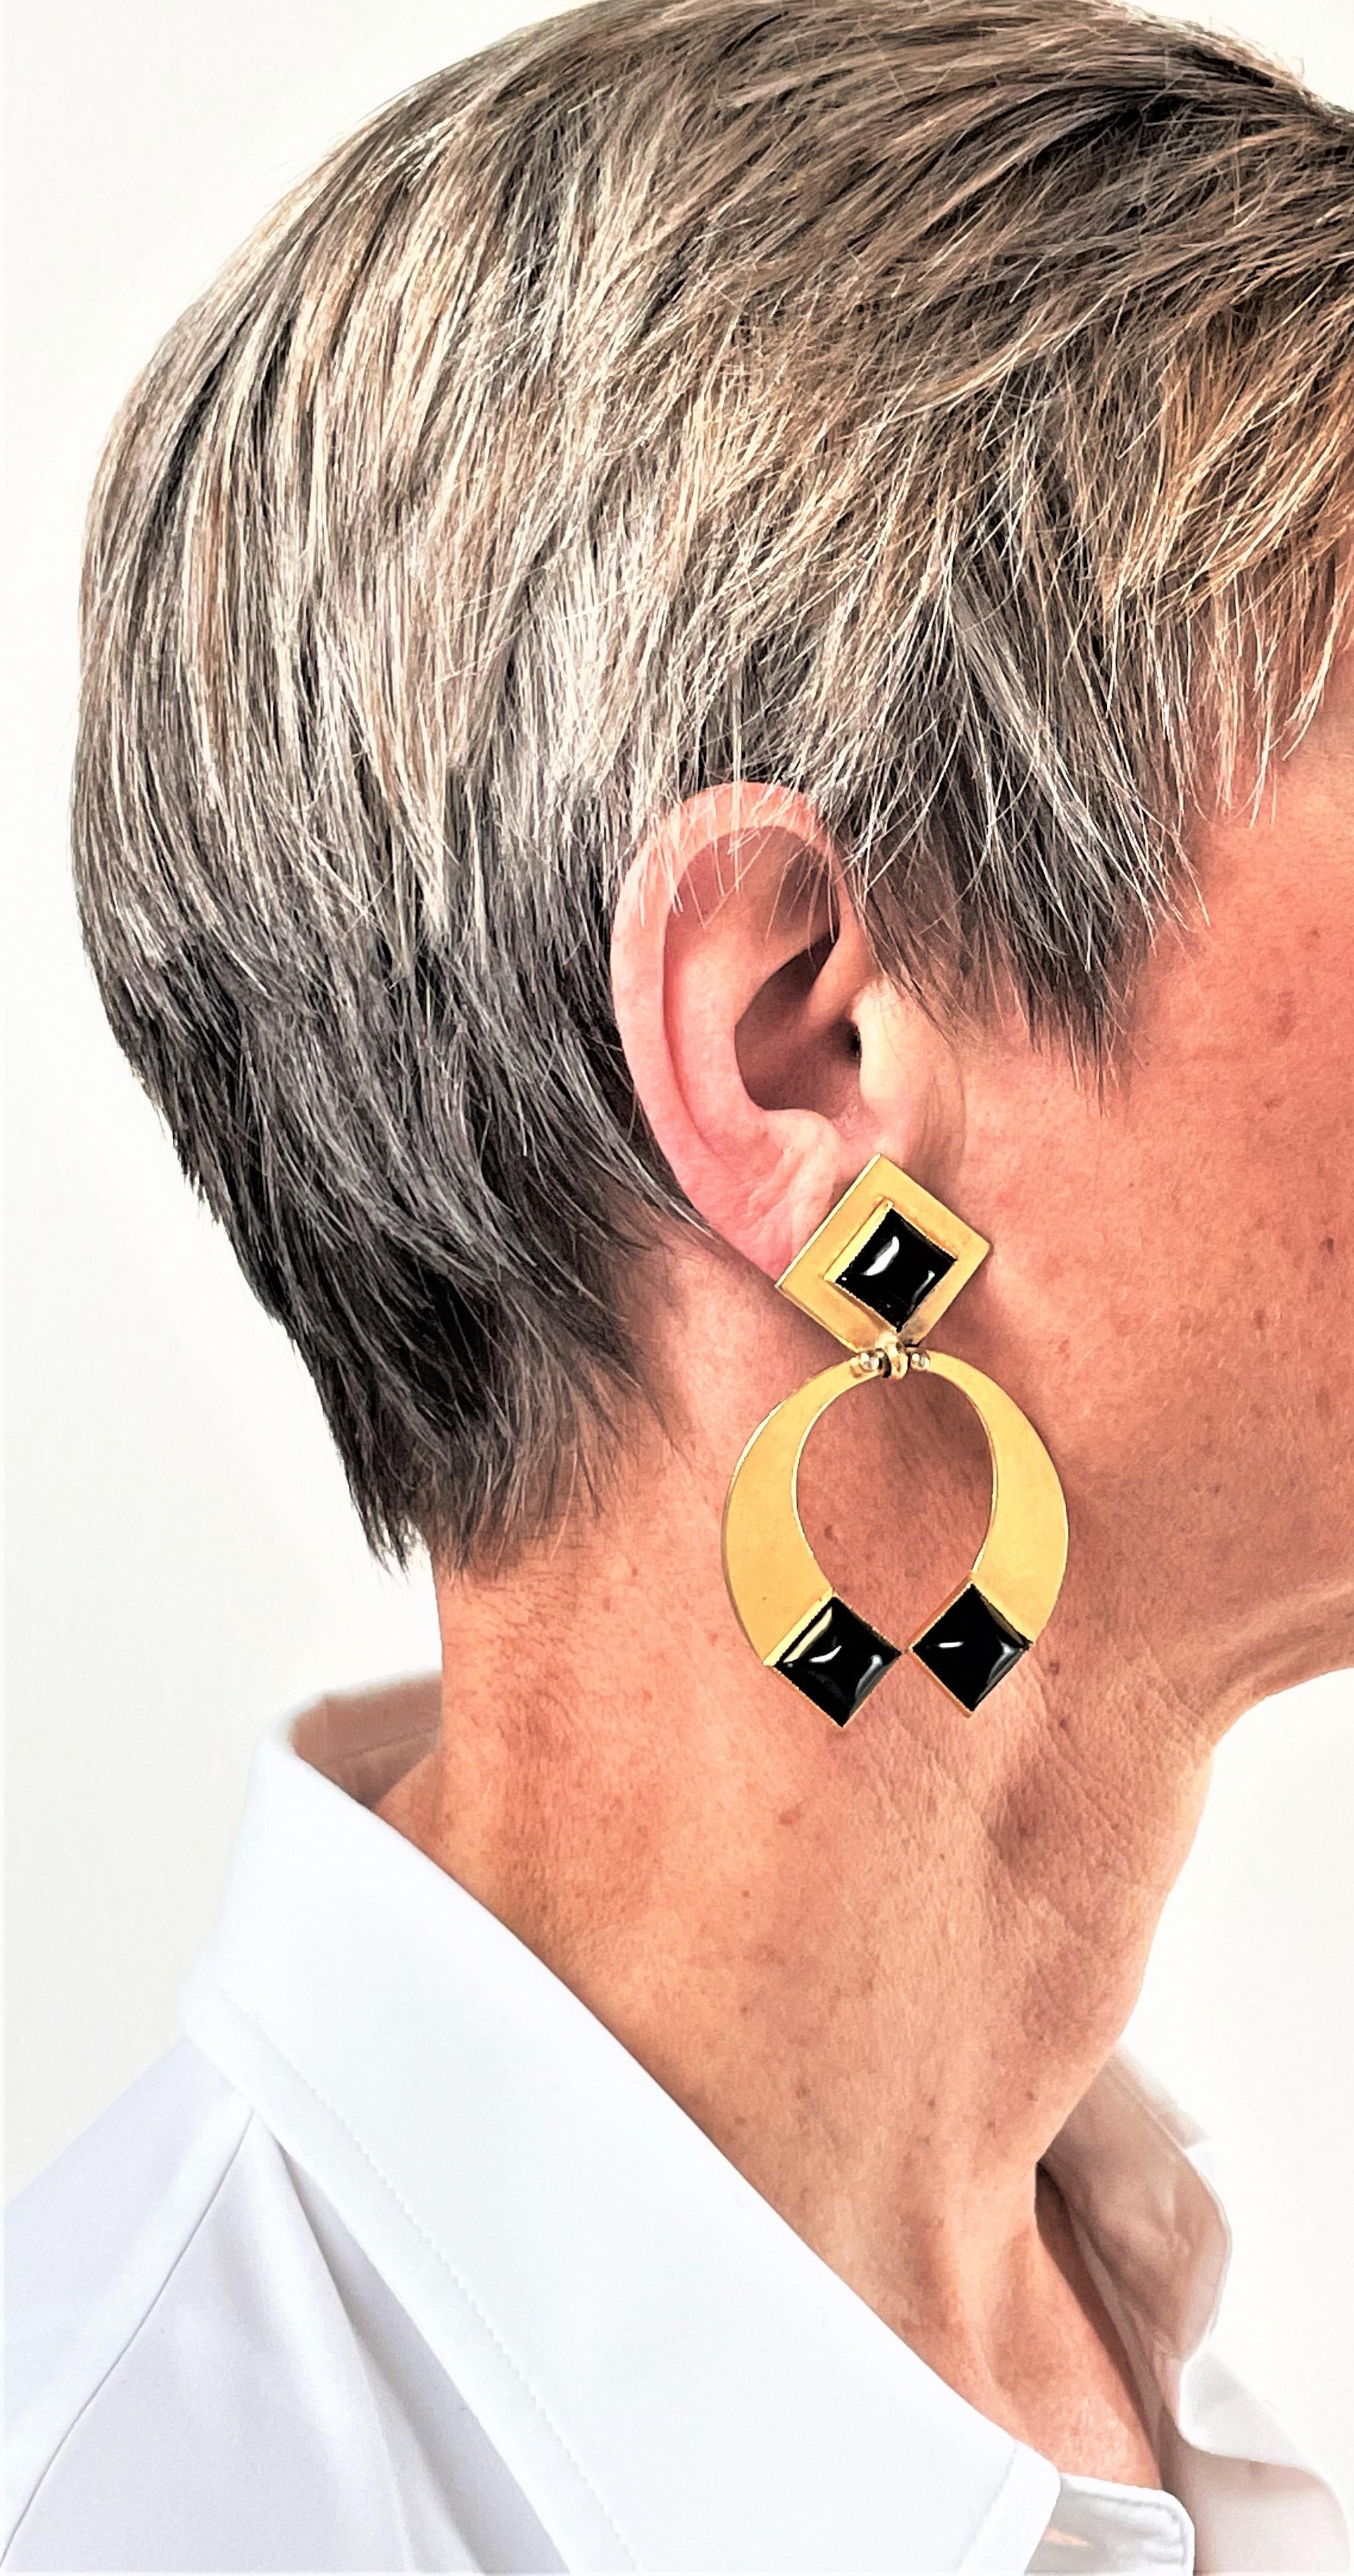 Very modern and stylish ear clips by Roger Scemama Paris from the 1960s. Featured in Ginger Moro's 'EURTOPEAN DESIGNER JEWELRY' book.

Size: Length 7 cm x 4.5 cm. The upper part, a square turned upside down 2 cm x 2 cm with a black glass stone 1 cm